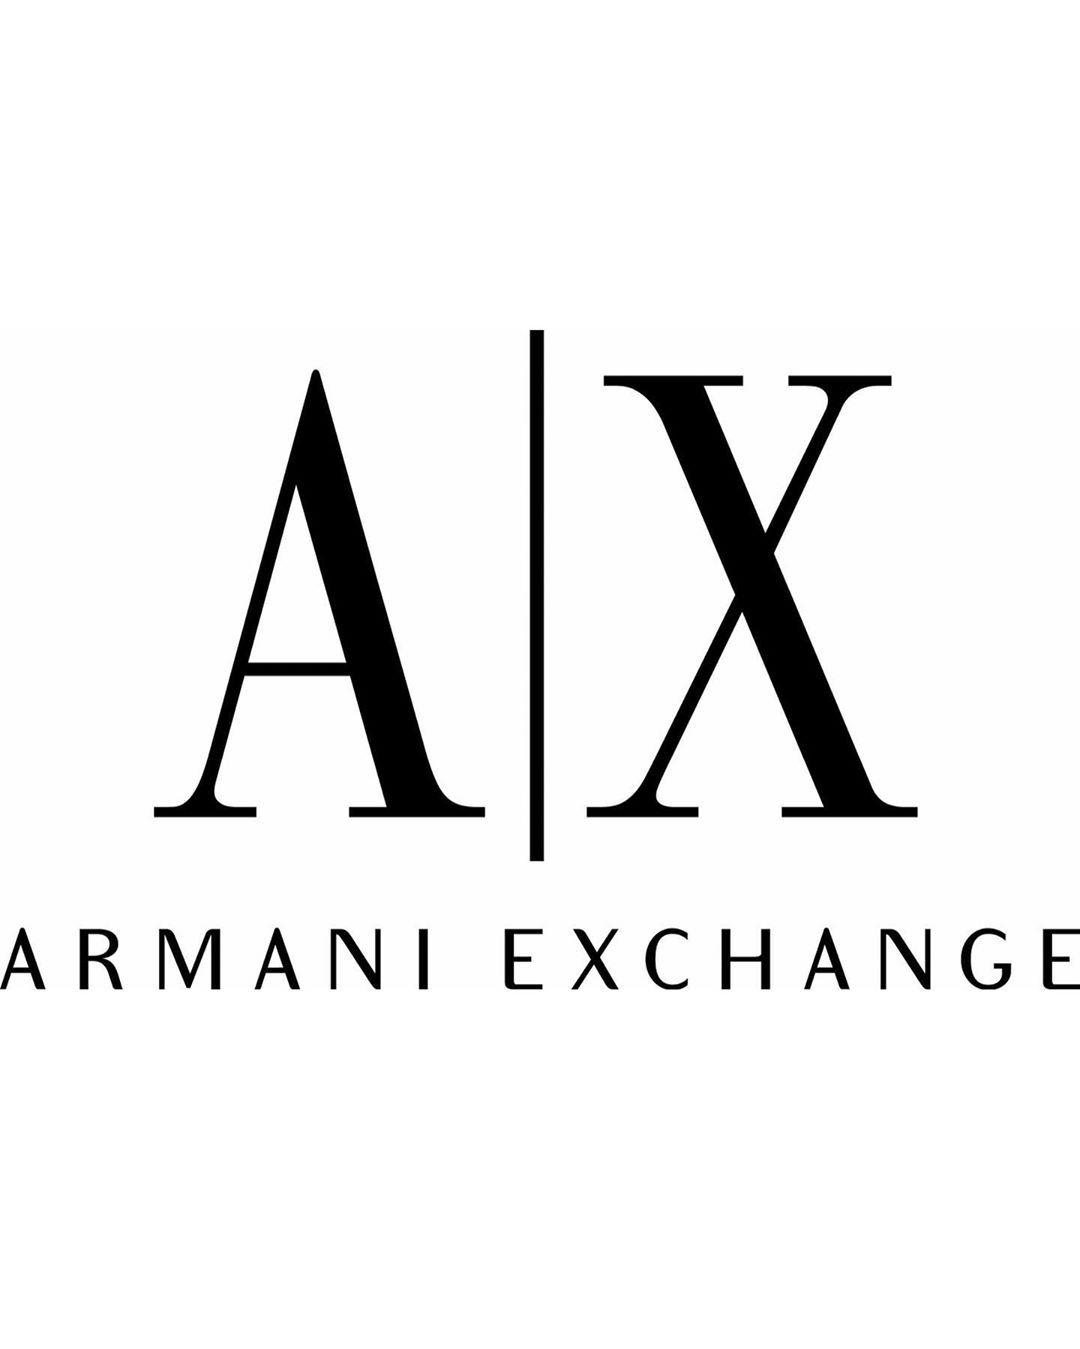 Quality means conformance to requirements not elegance. Armani exchange, Armani, Logo design typography